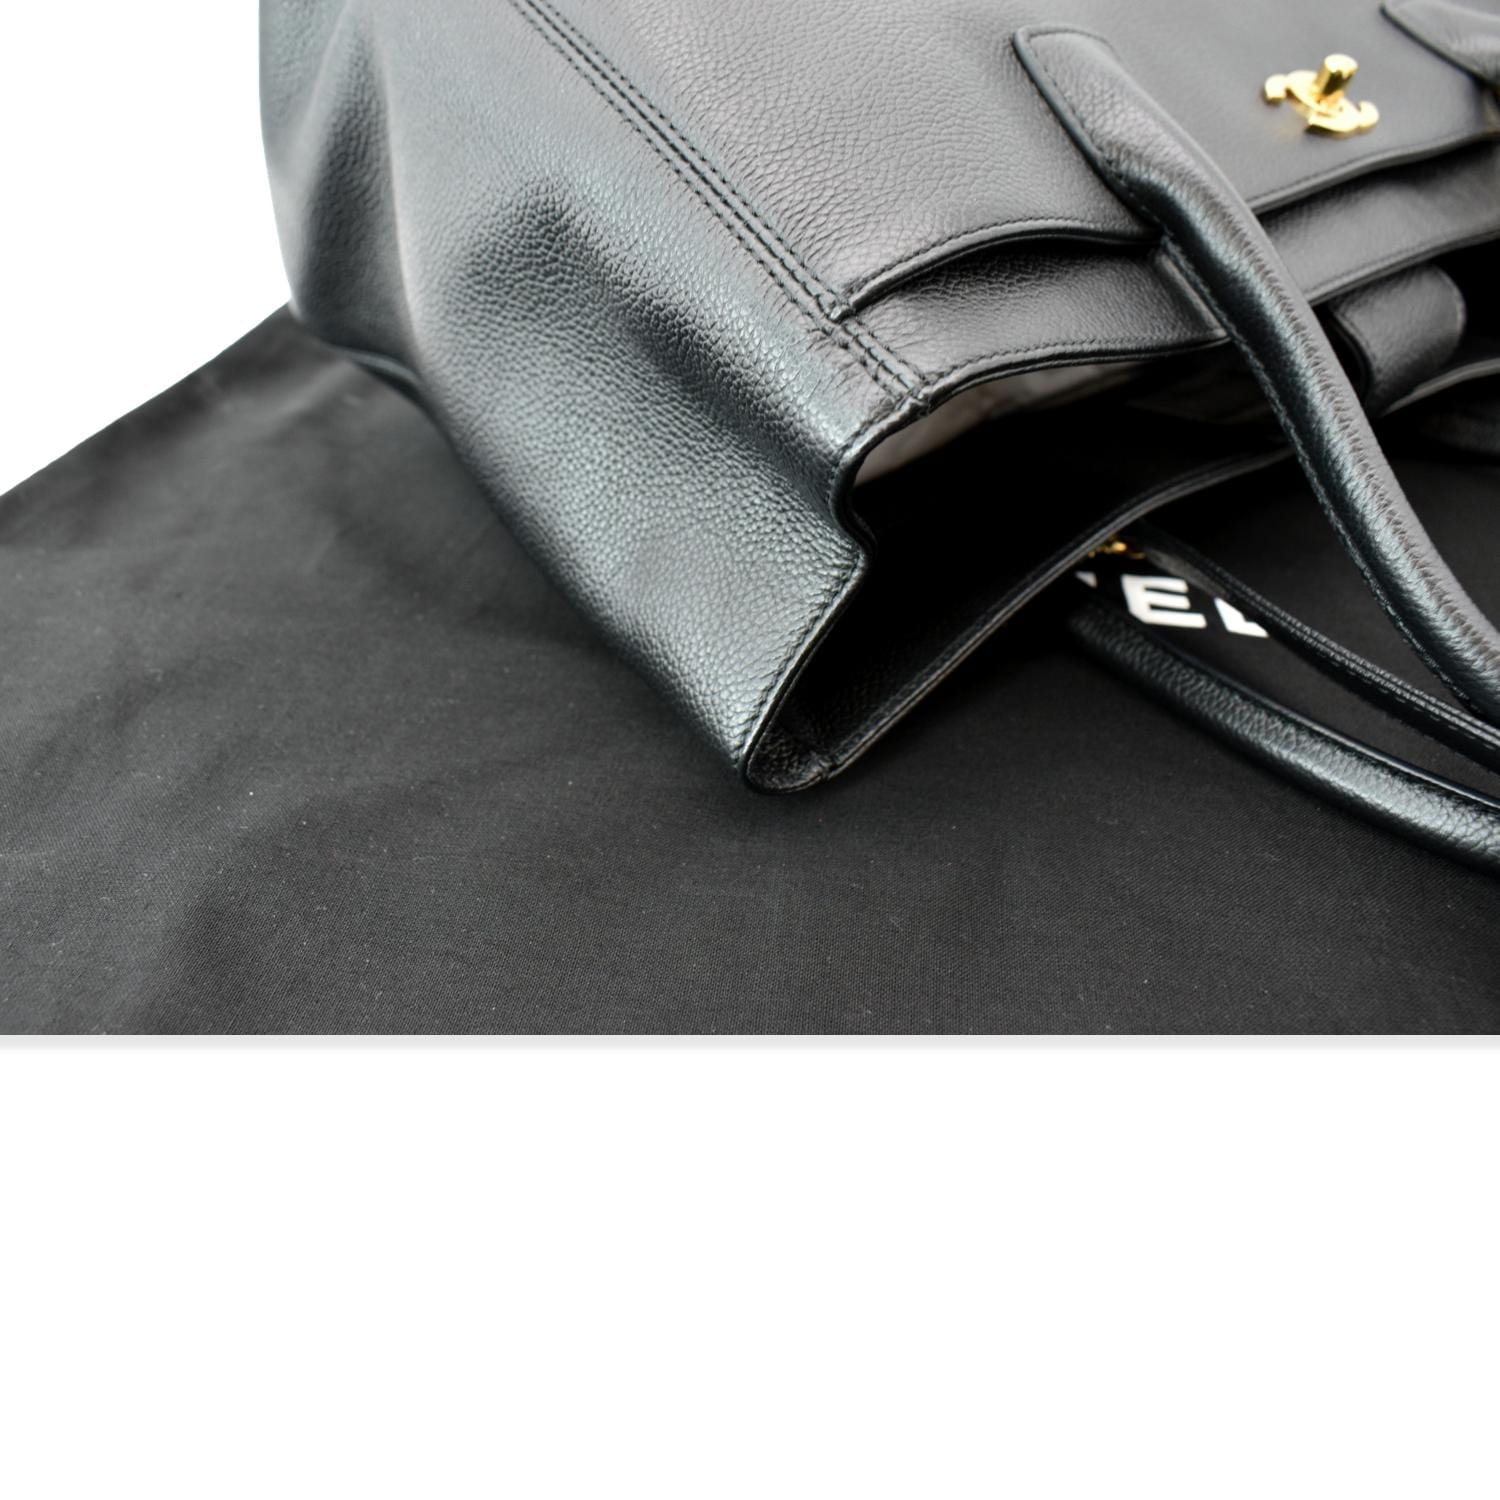 Executive Cerf Tote with Strap Black